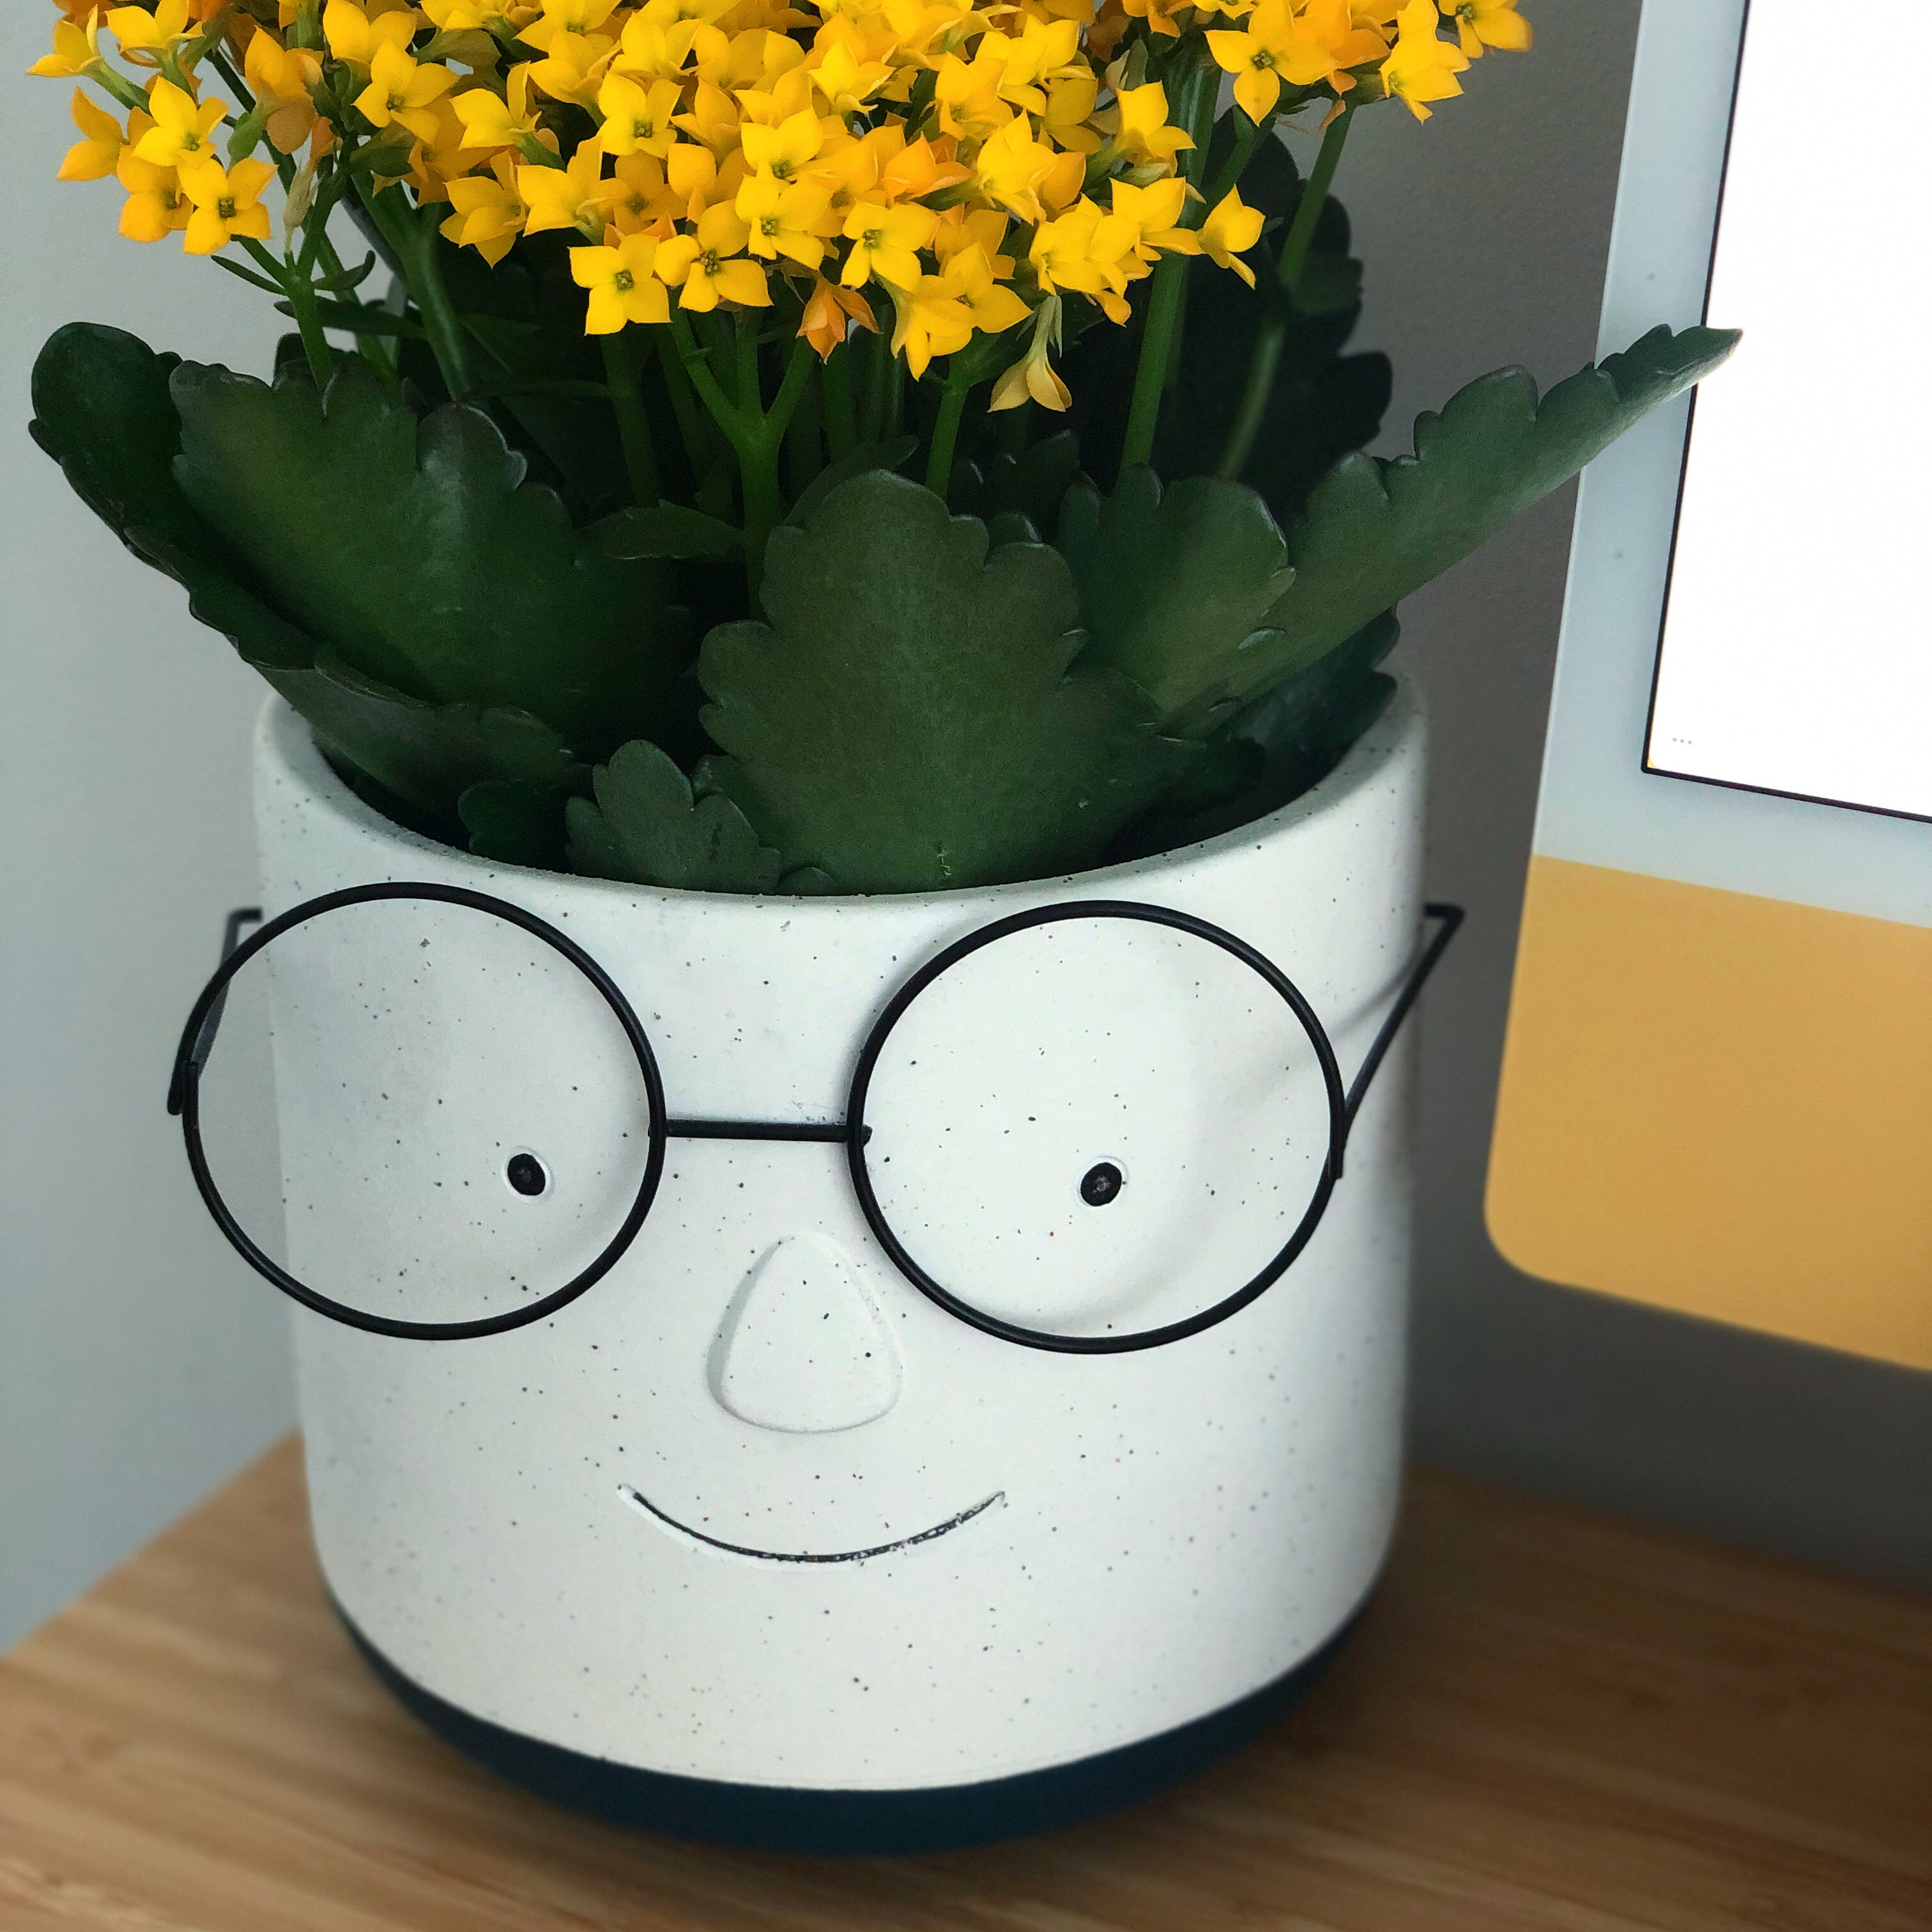 A plant with yellow flowers in a planter with a smiling face and glasses.